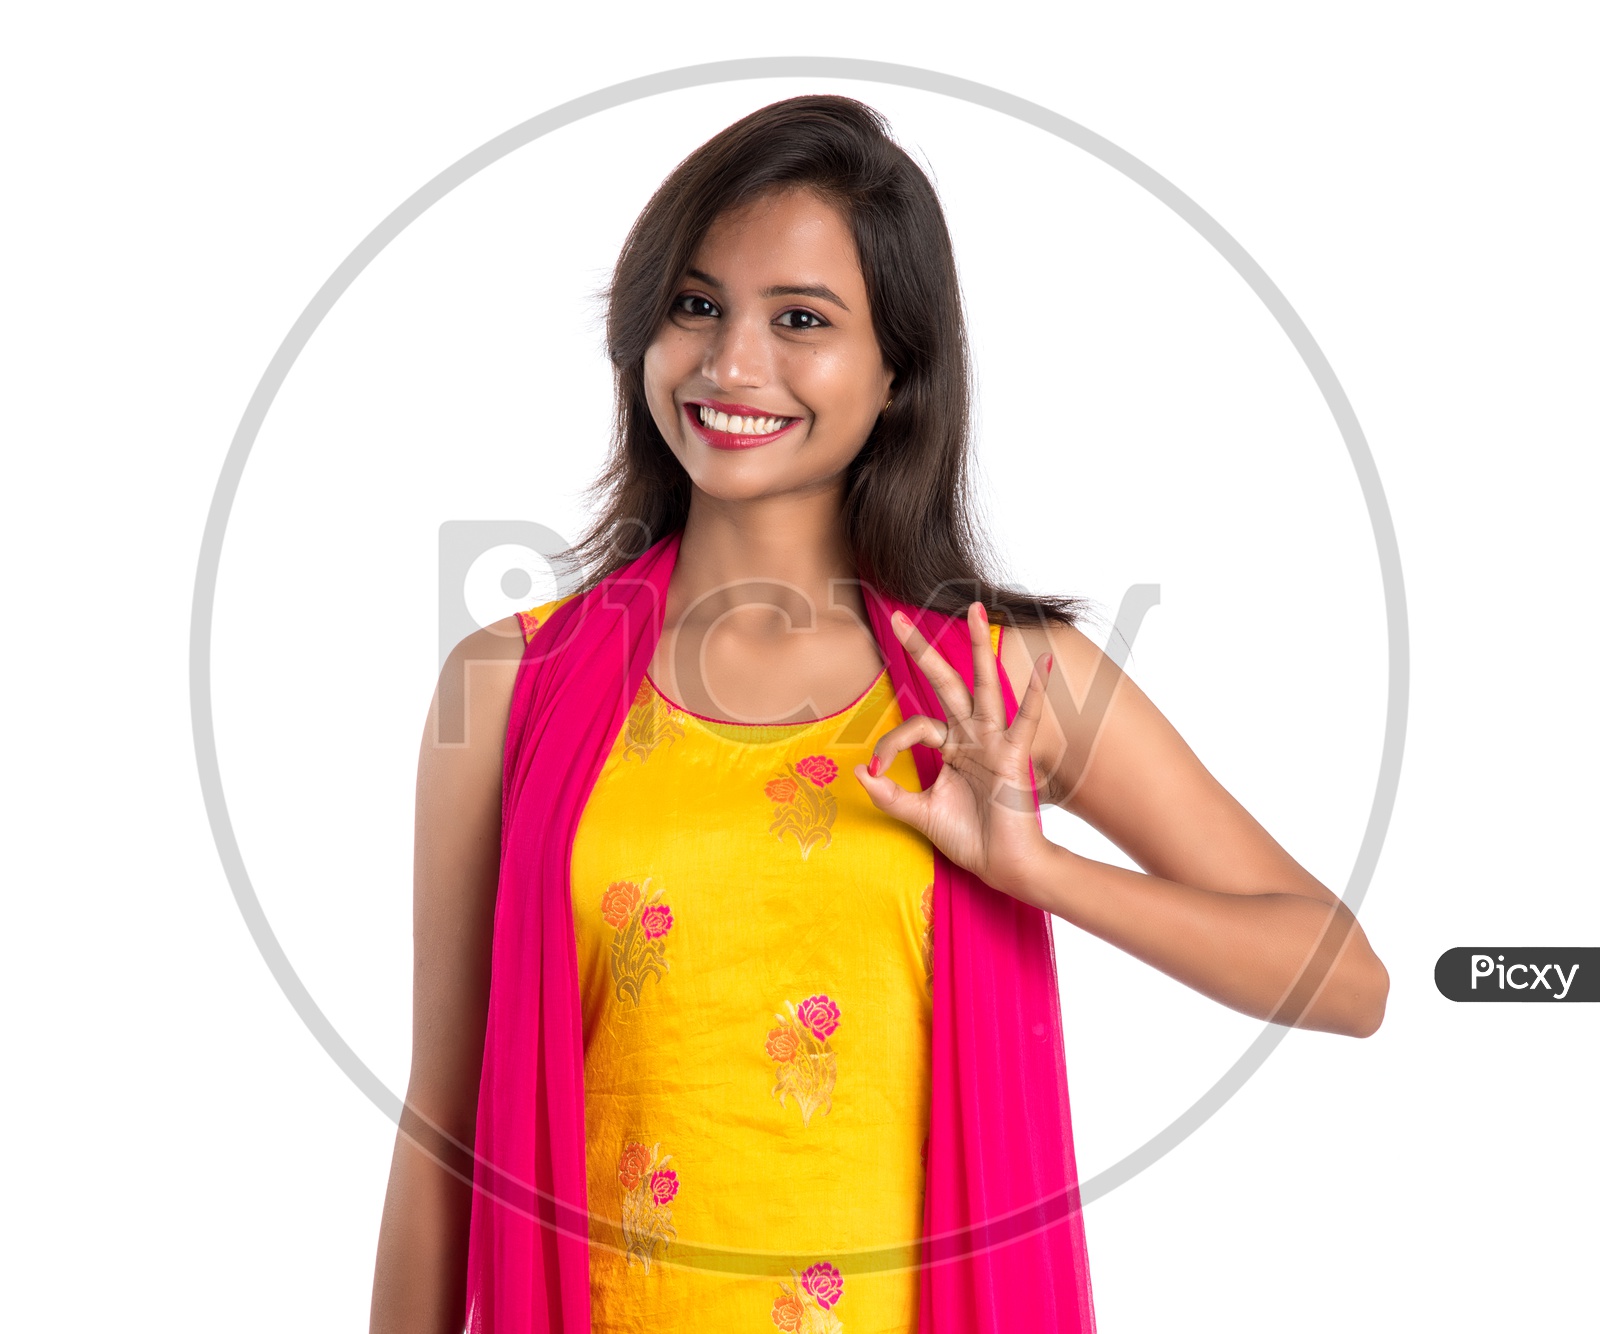 Young Indian Girl or Woman With Happy Positive Gestures And Smile Expressions Posing On an Isolated  White Background